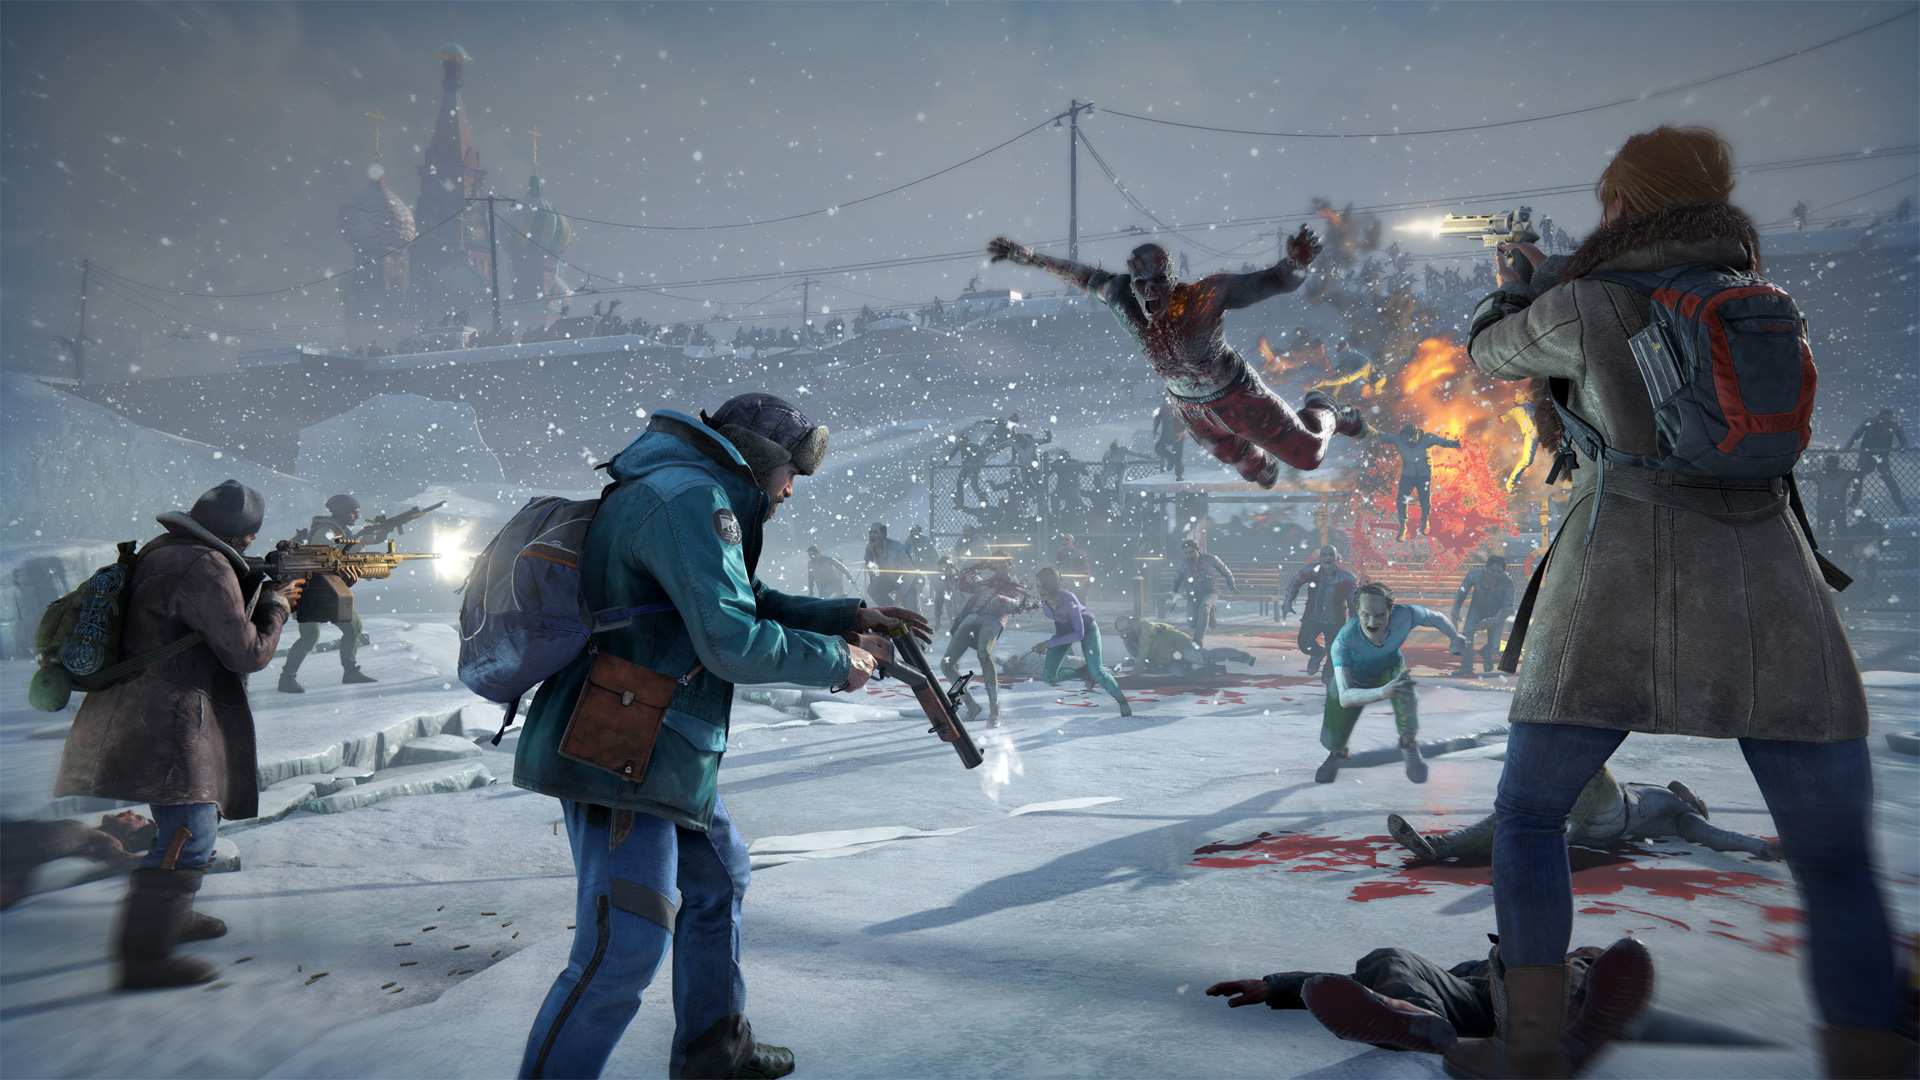 World War Z Sells Over 1 Million Copies Within First Week